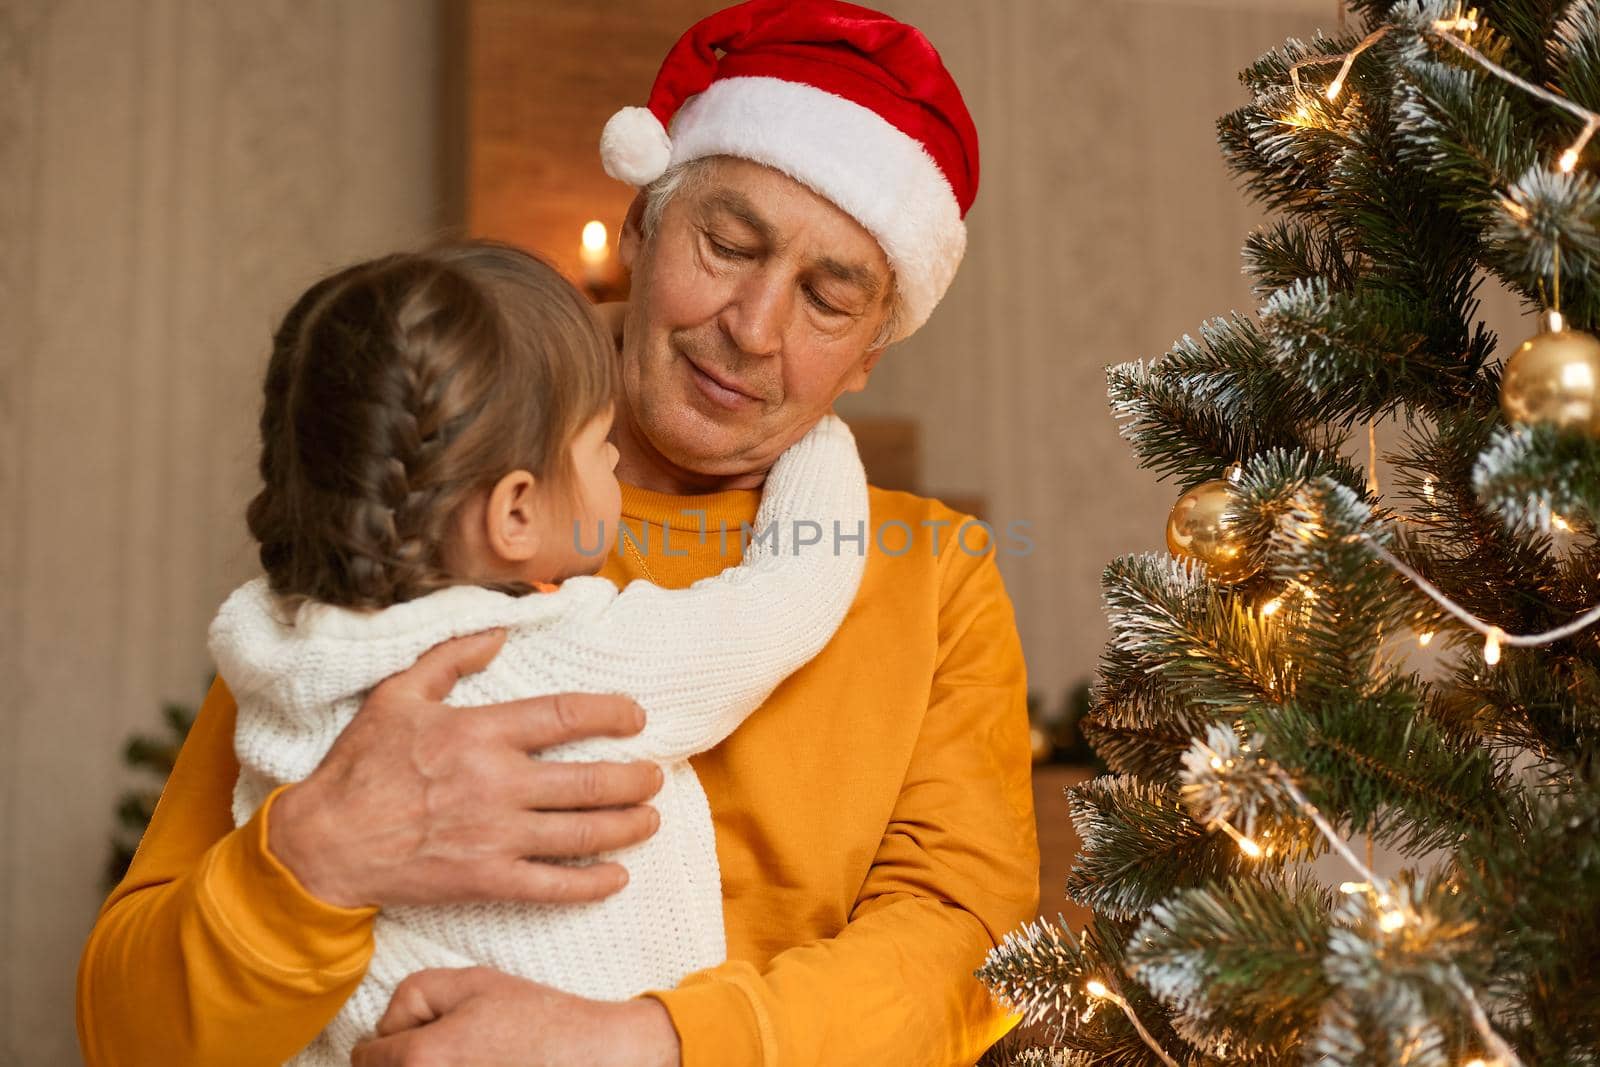 Happy family on Christmas eve posing in festive room, mature man hugging granddaughter in white sweater and with pigtails, family expressing love, celebrating winter holiday together.